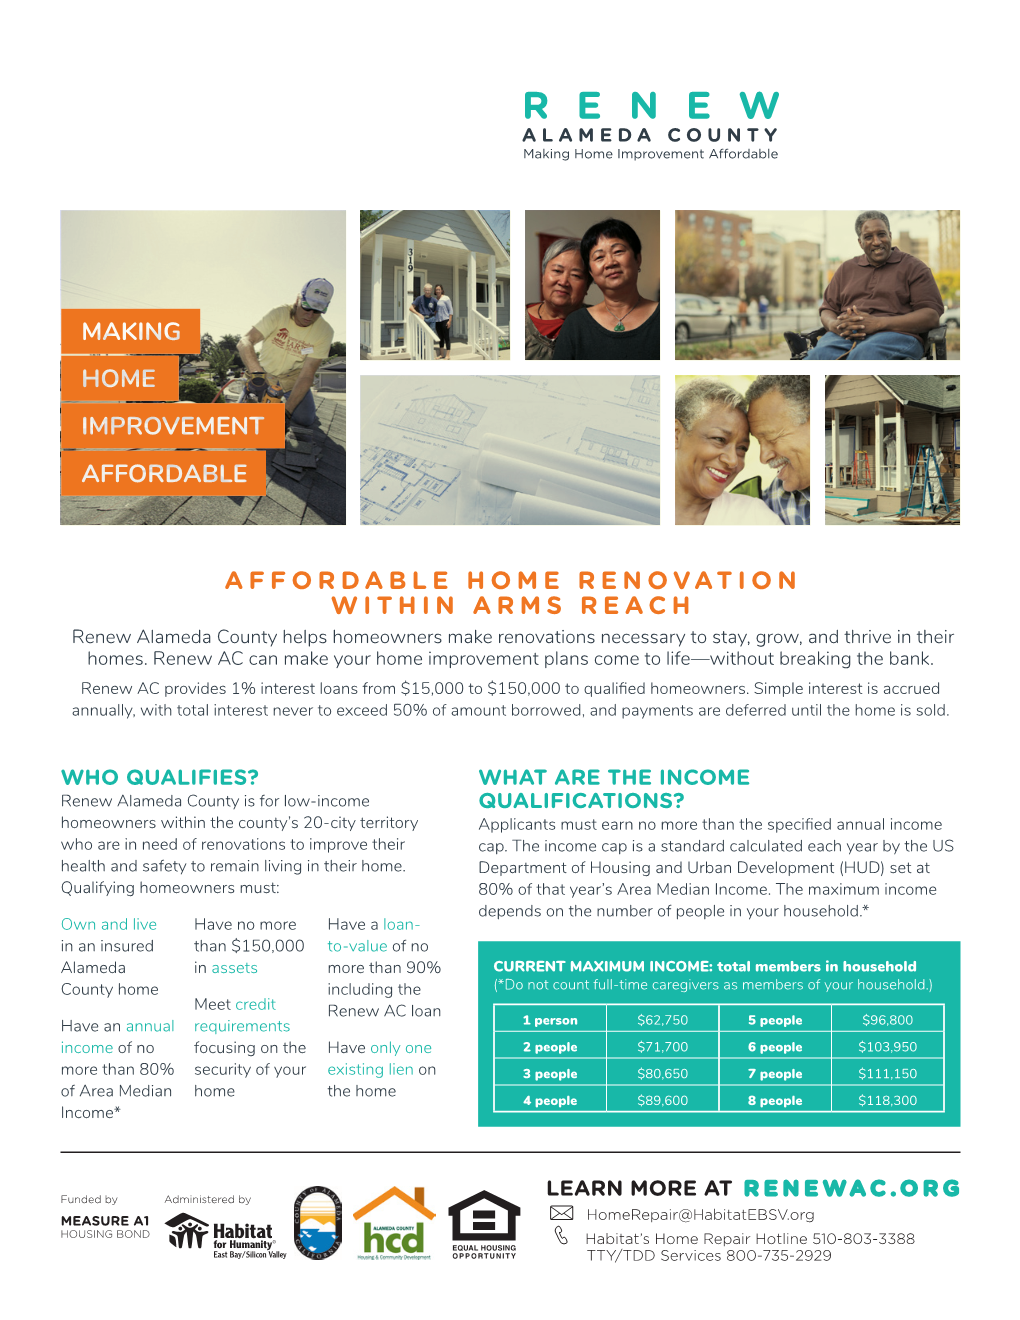 AFFORDABLE HOME RENOVATION WITHIN ARMS REACH Renew Alameda County Helps Homeowners Make Renovations Necessary to Stay, Grow, and Thrive in Their Homes